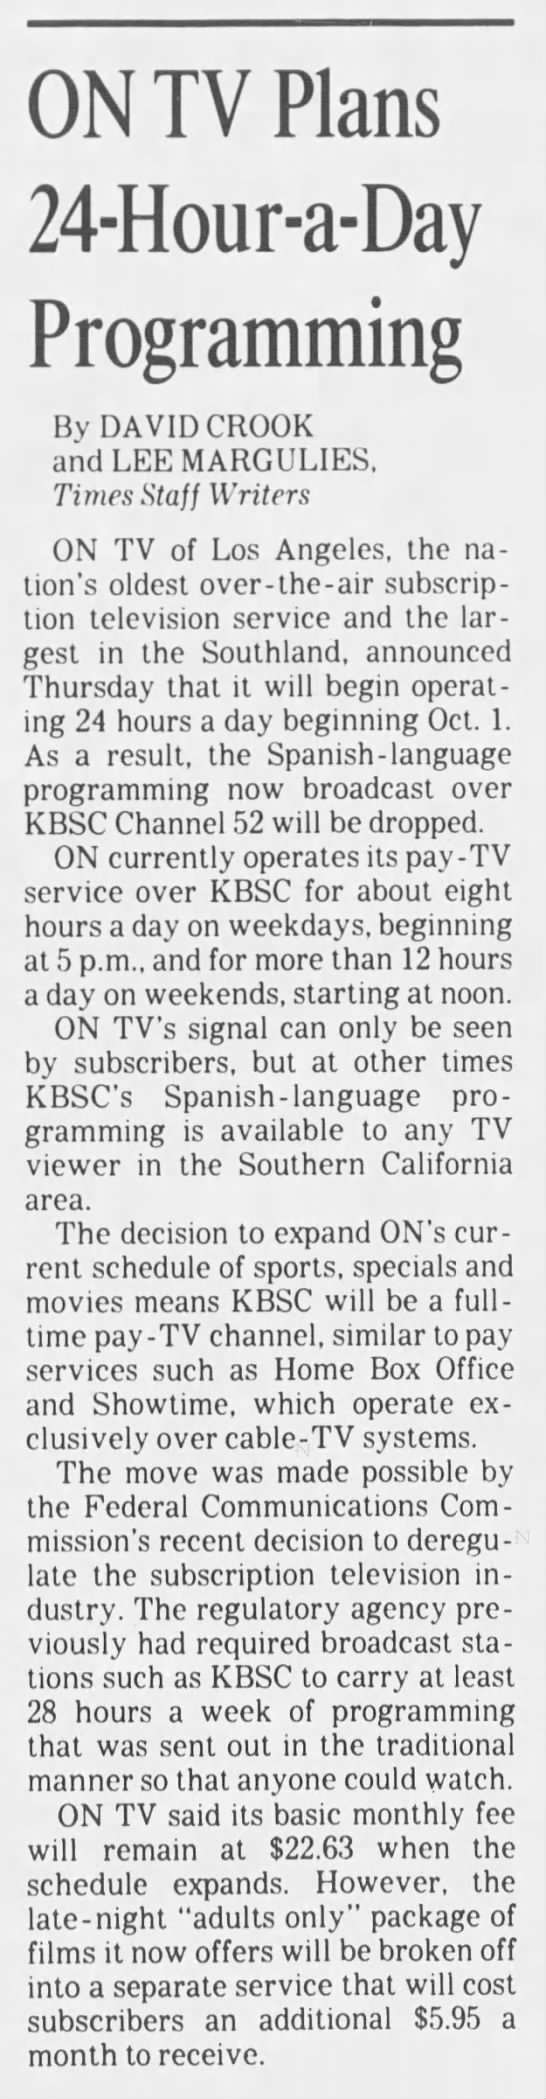 ON TV Plans 24-Hour-a-Day Programming - 